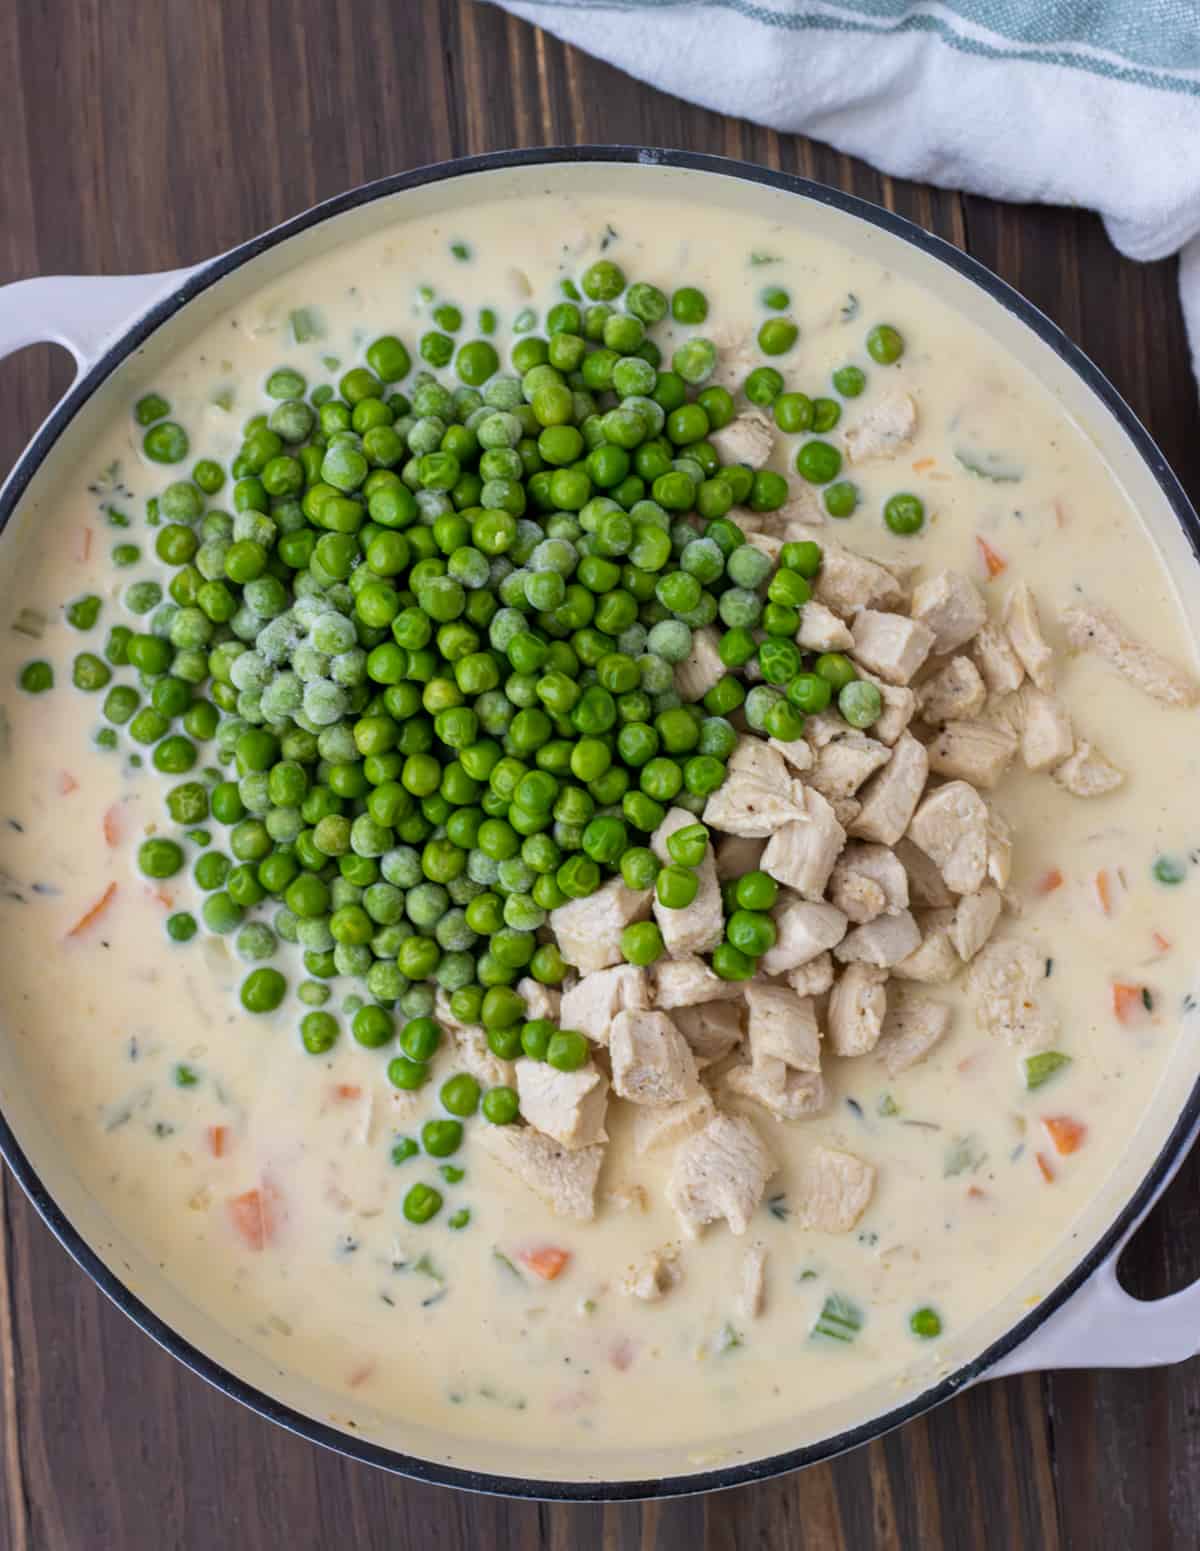 Cooked chicken and frozen peas added to the chicken pot pie filling.